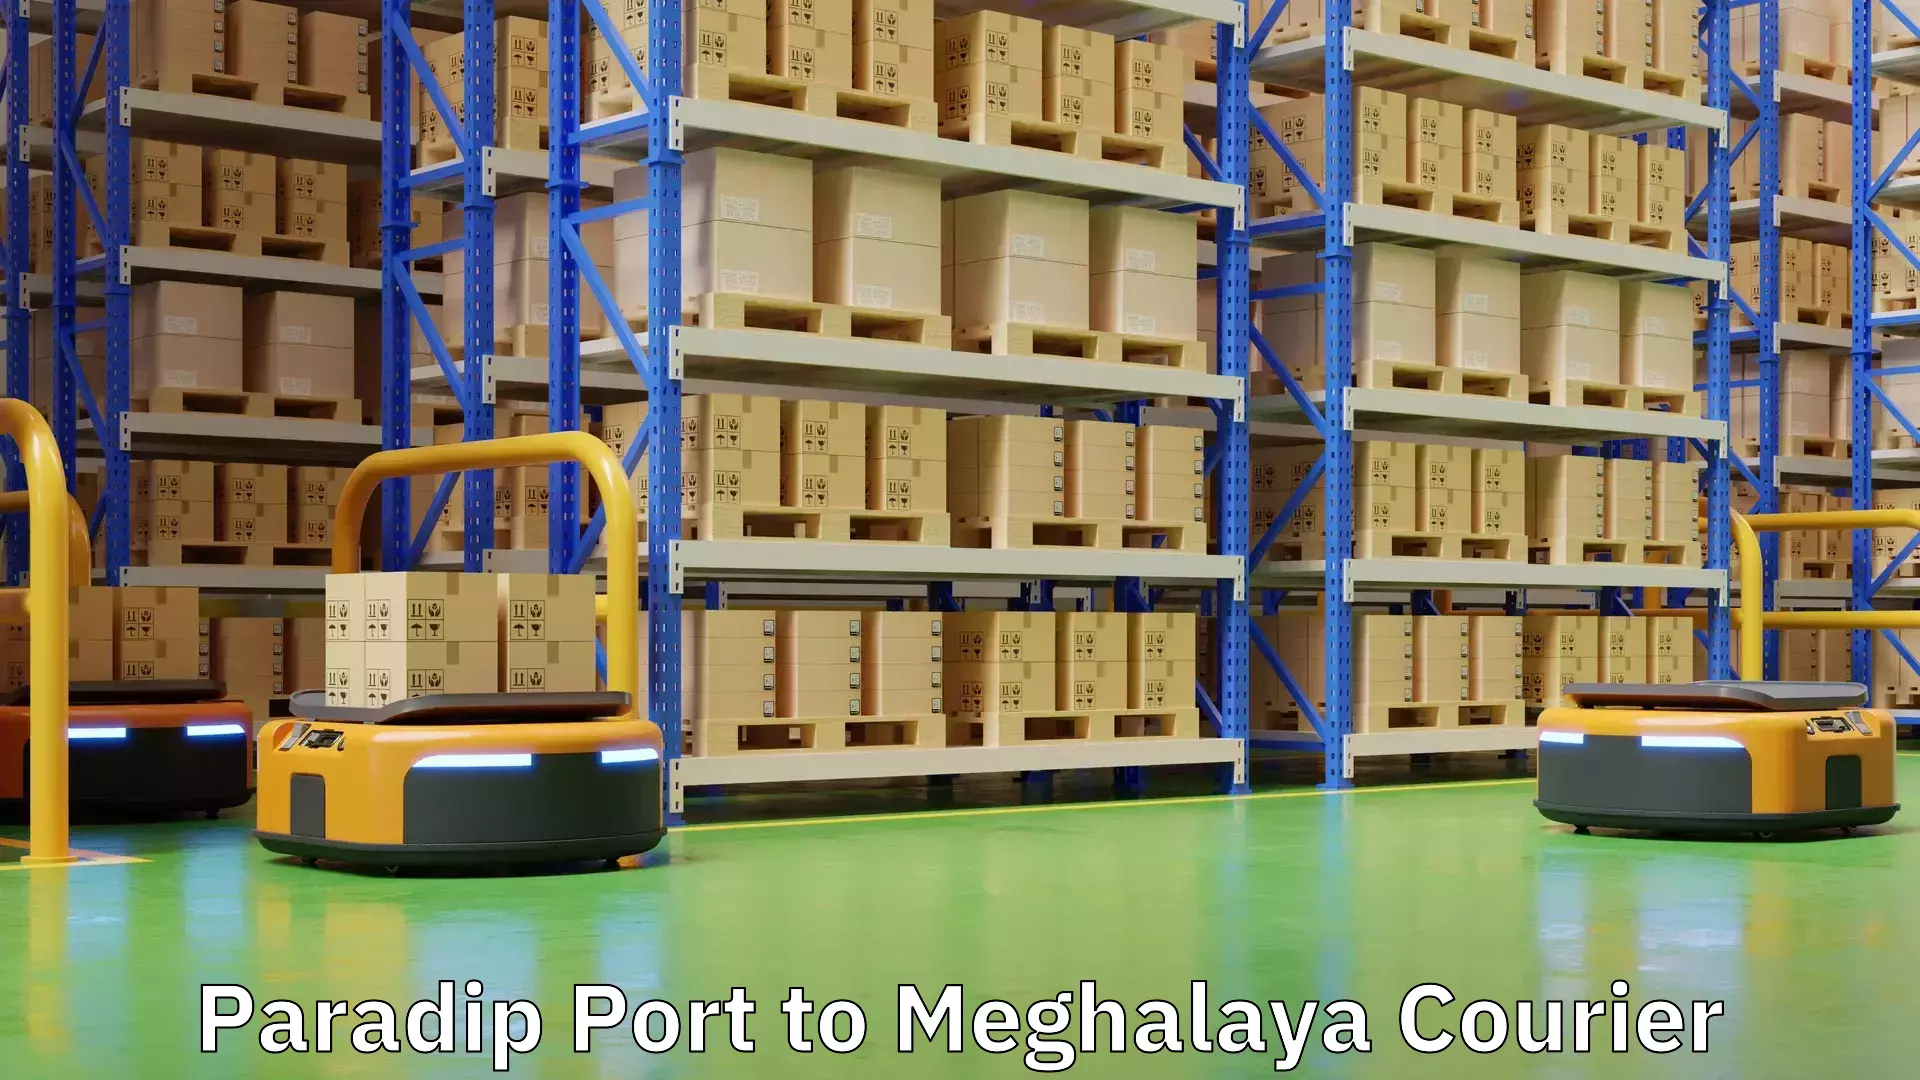 Corporate courier solutions Paradip Port to Meghalaya